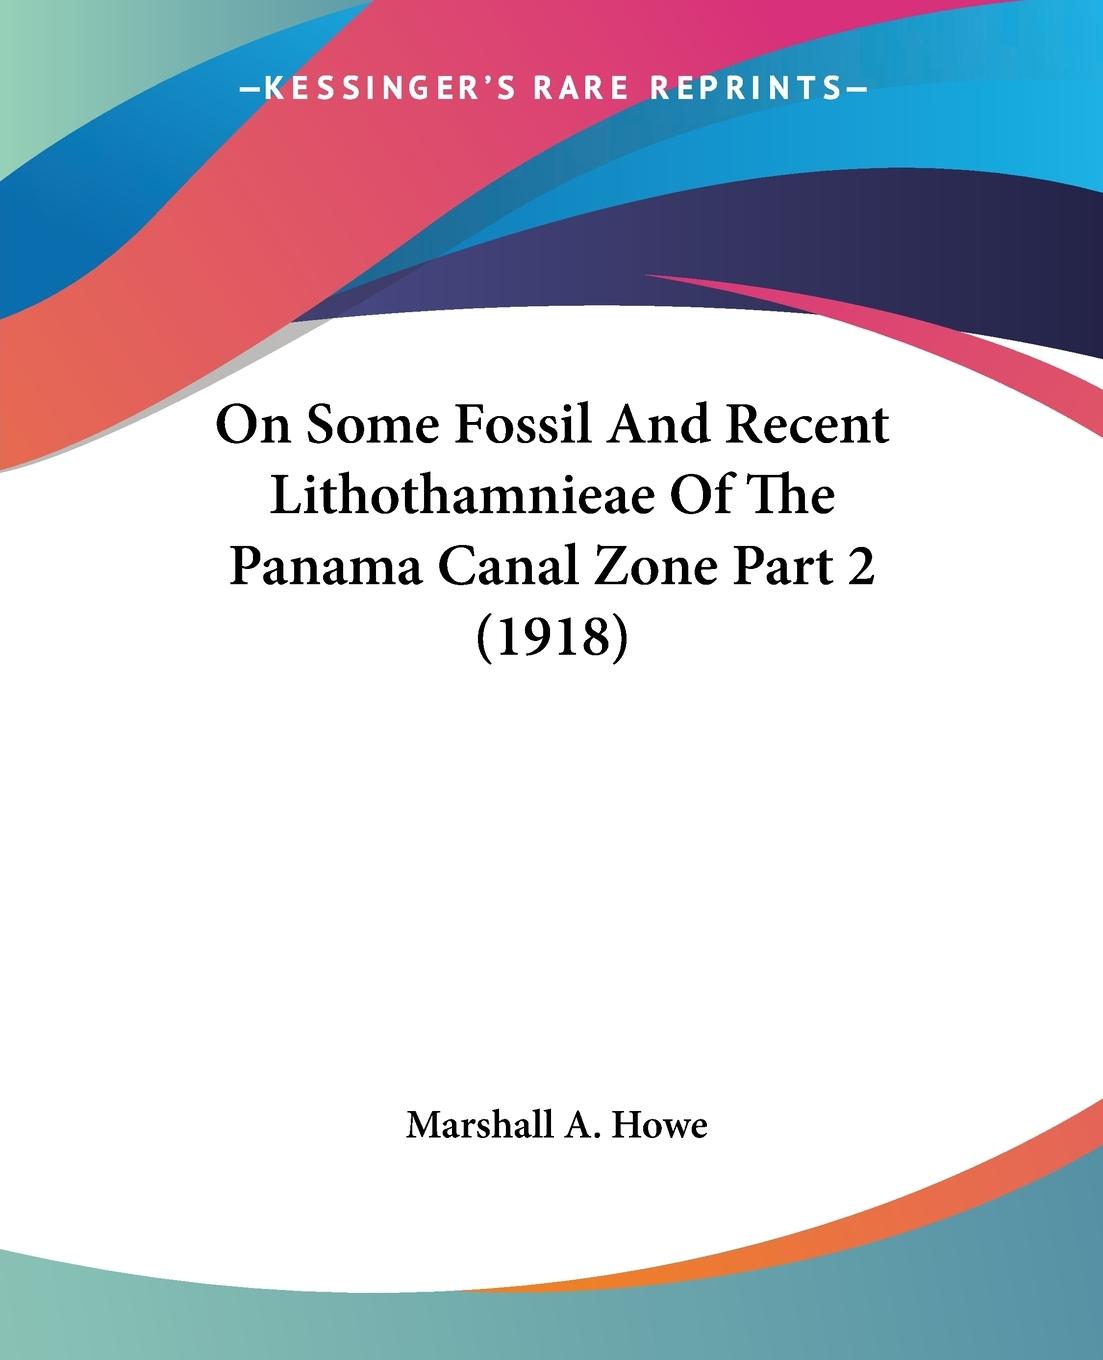 On Some Fossil And Recent Lithothamnieae Of The Panama Canal Zone Part 2 (1918) - Howe, Marshall A.